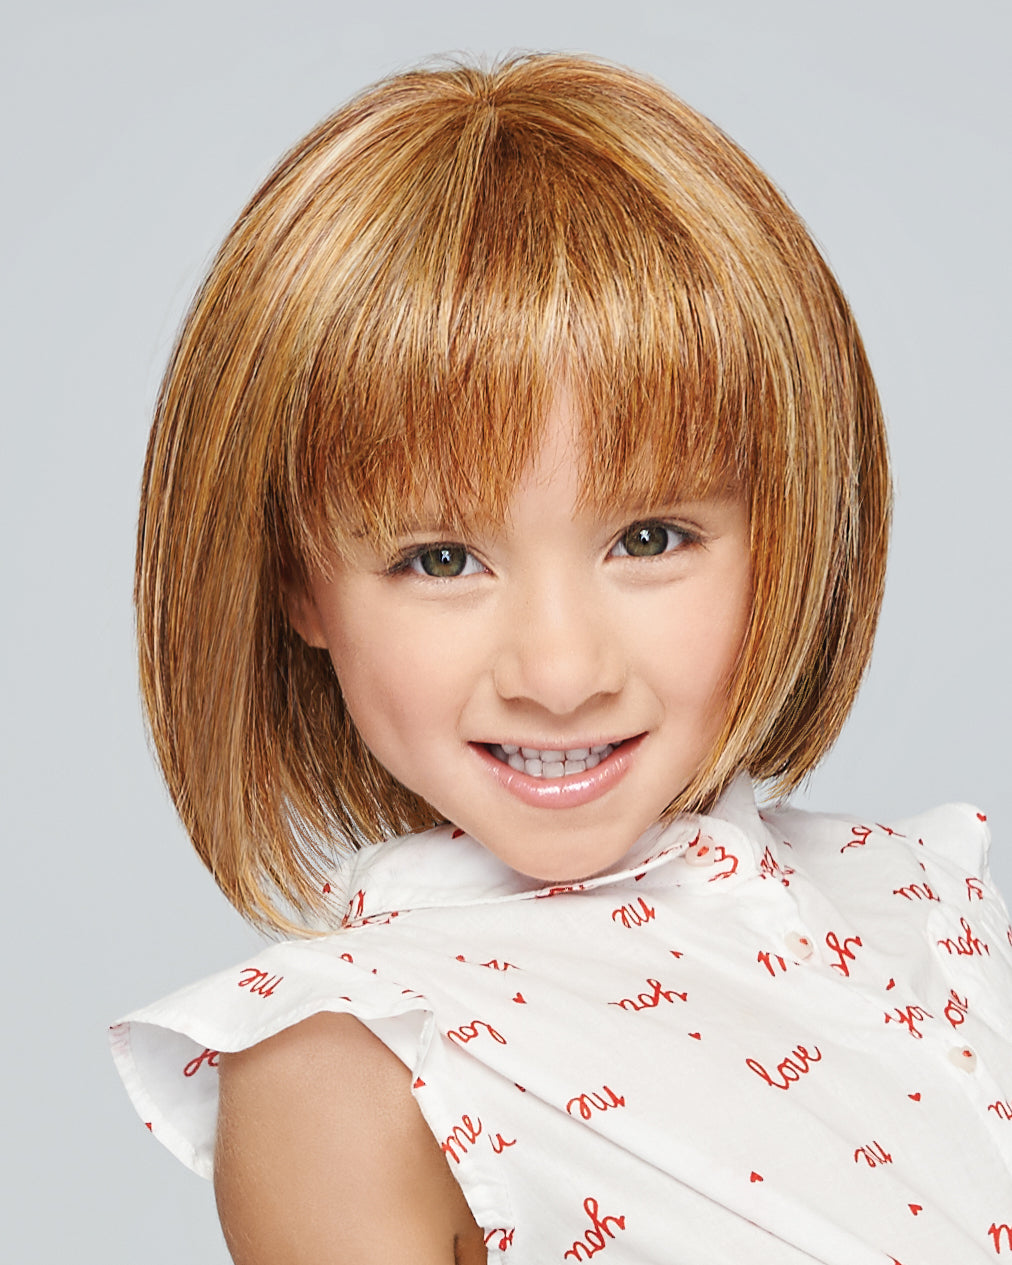 wigs for children, children’s wigs, childrens wigs, wigs for young adults, wigs for teens